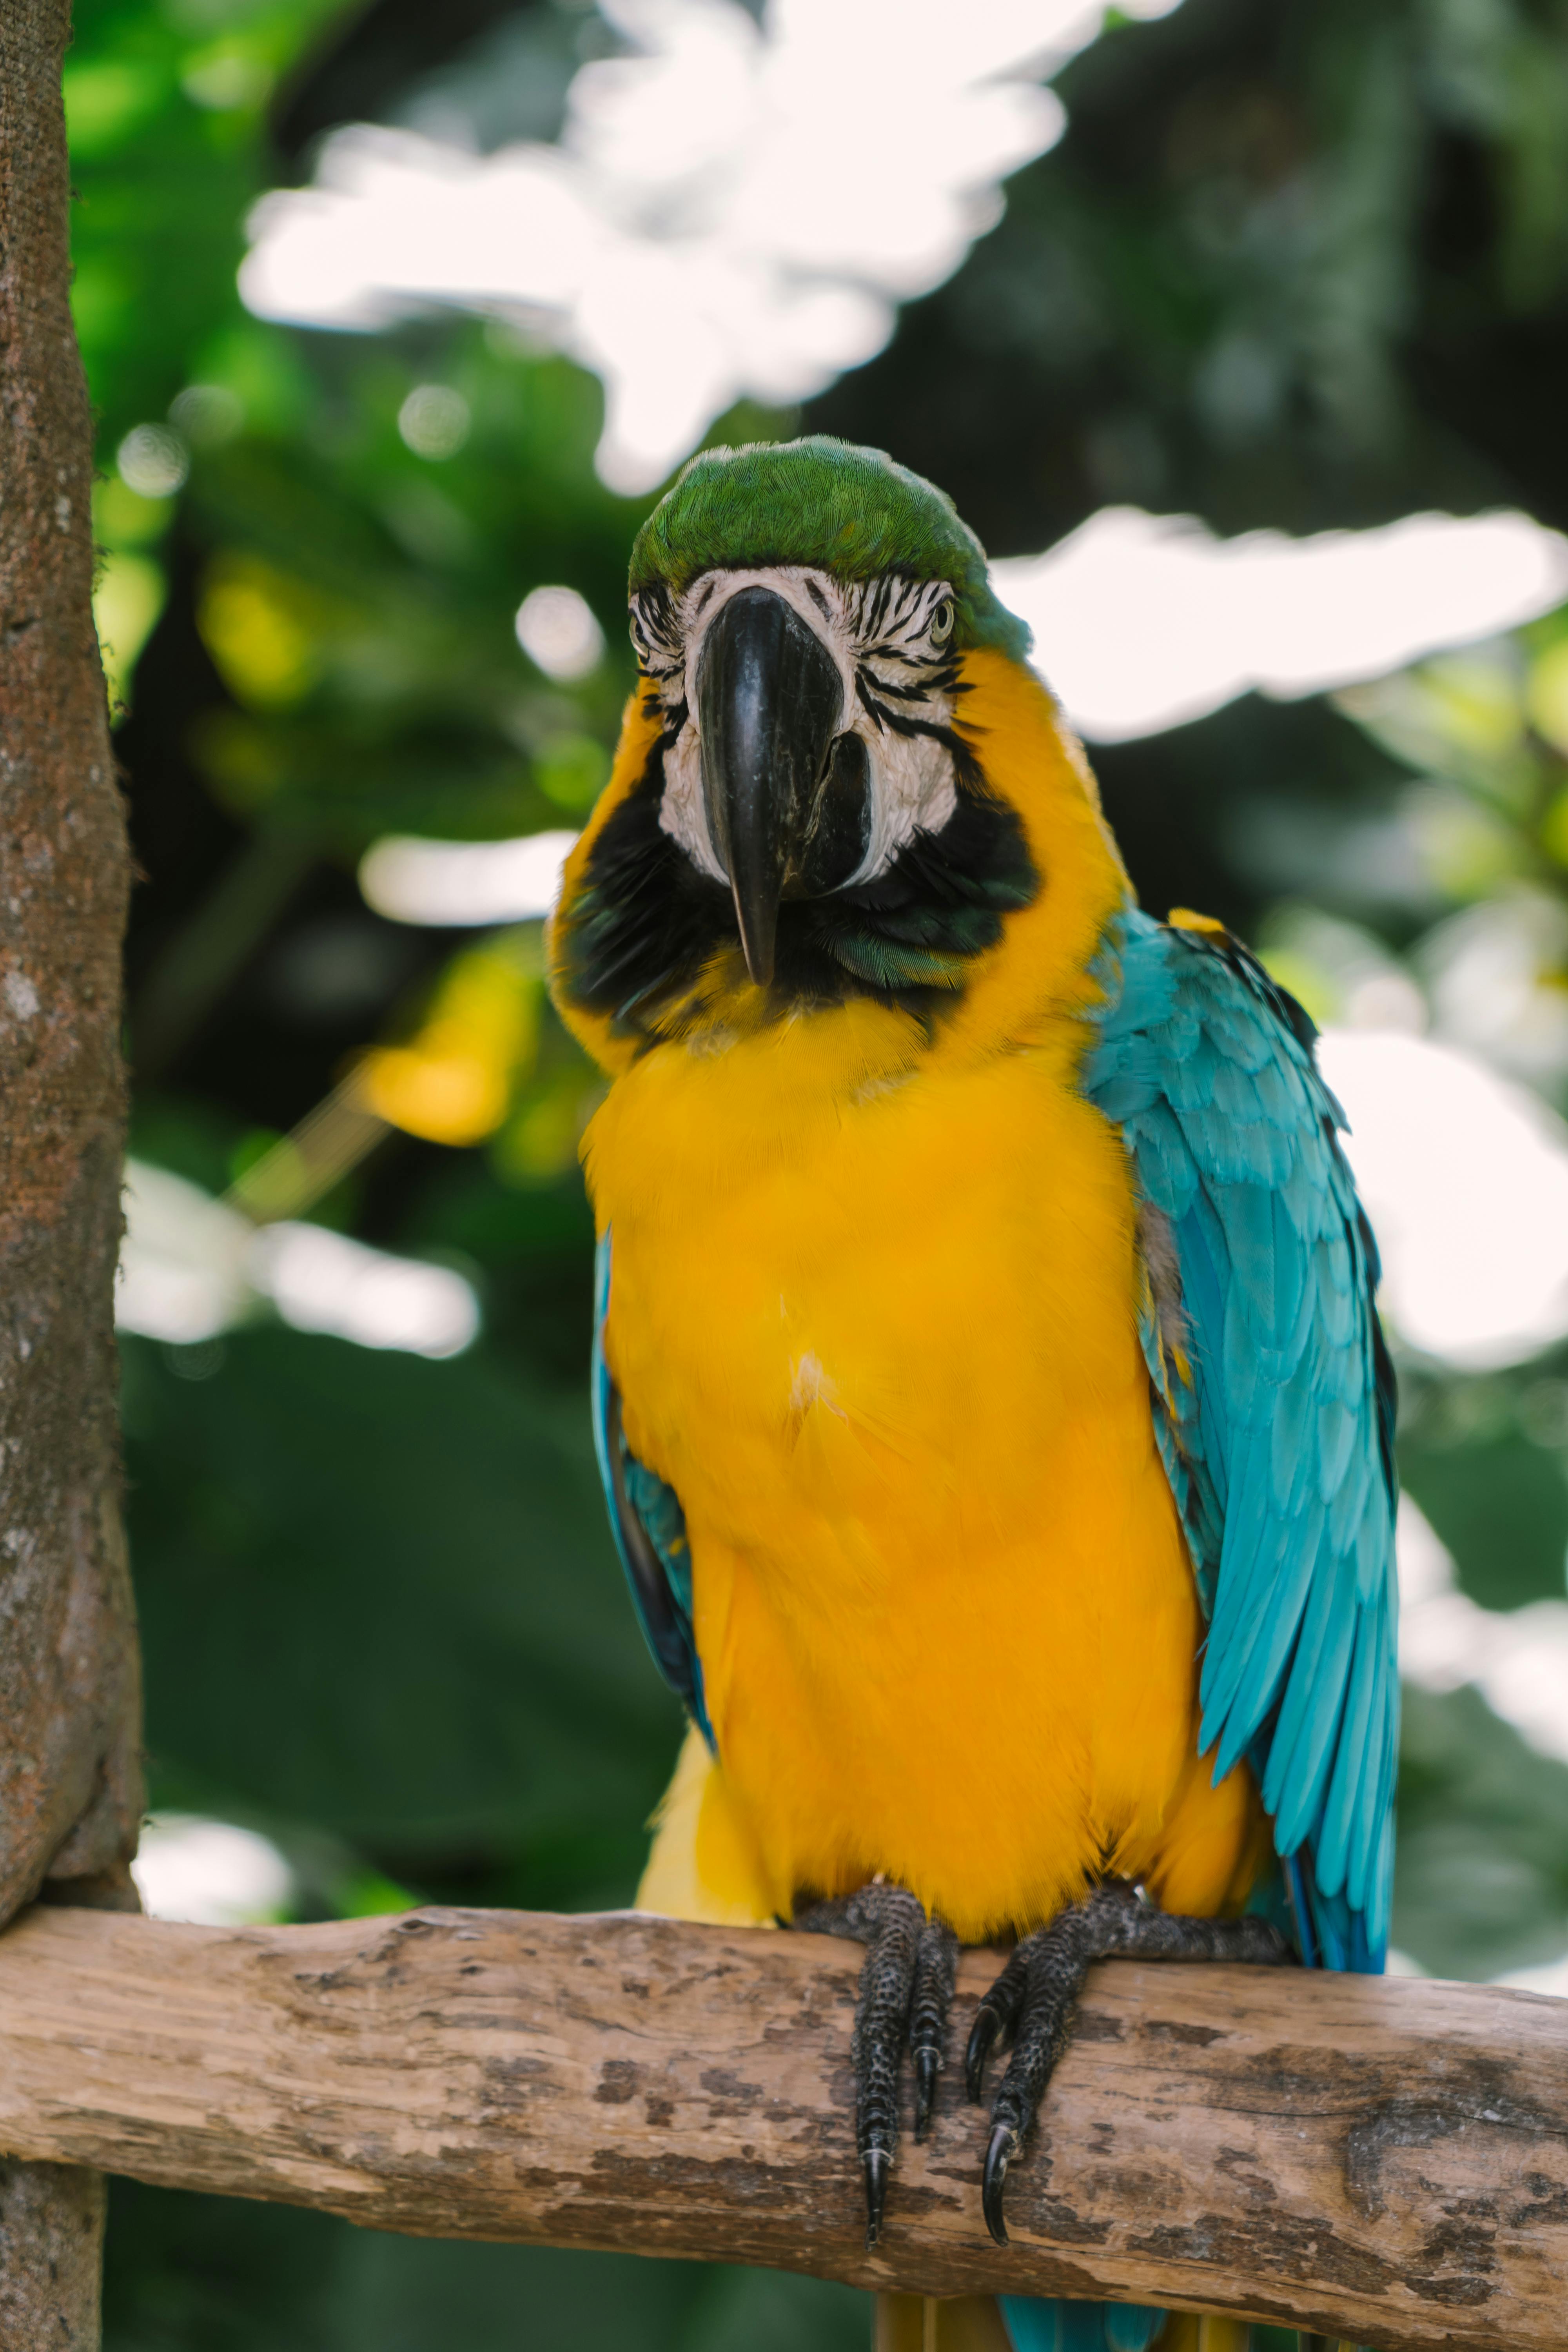 Macaw Bird in Close Up Photography · Free Stock Photo